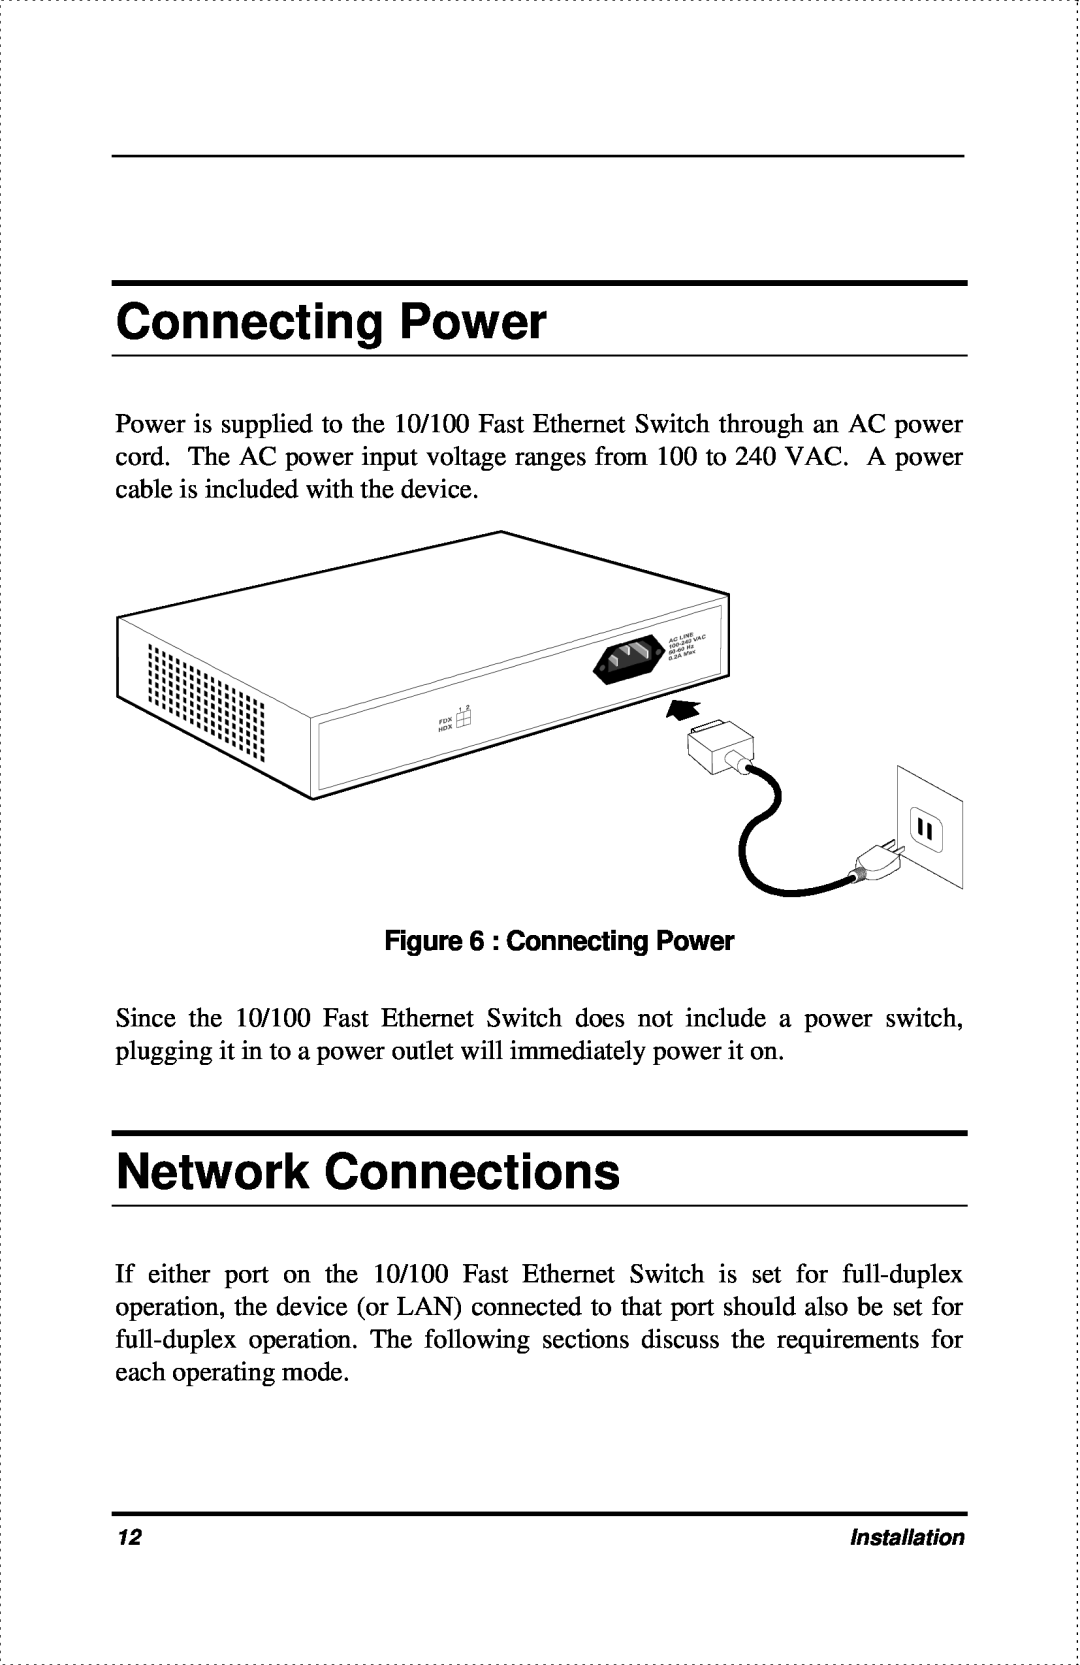 D-Link DES-802 manual Connecting Power, Network Connections 